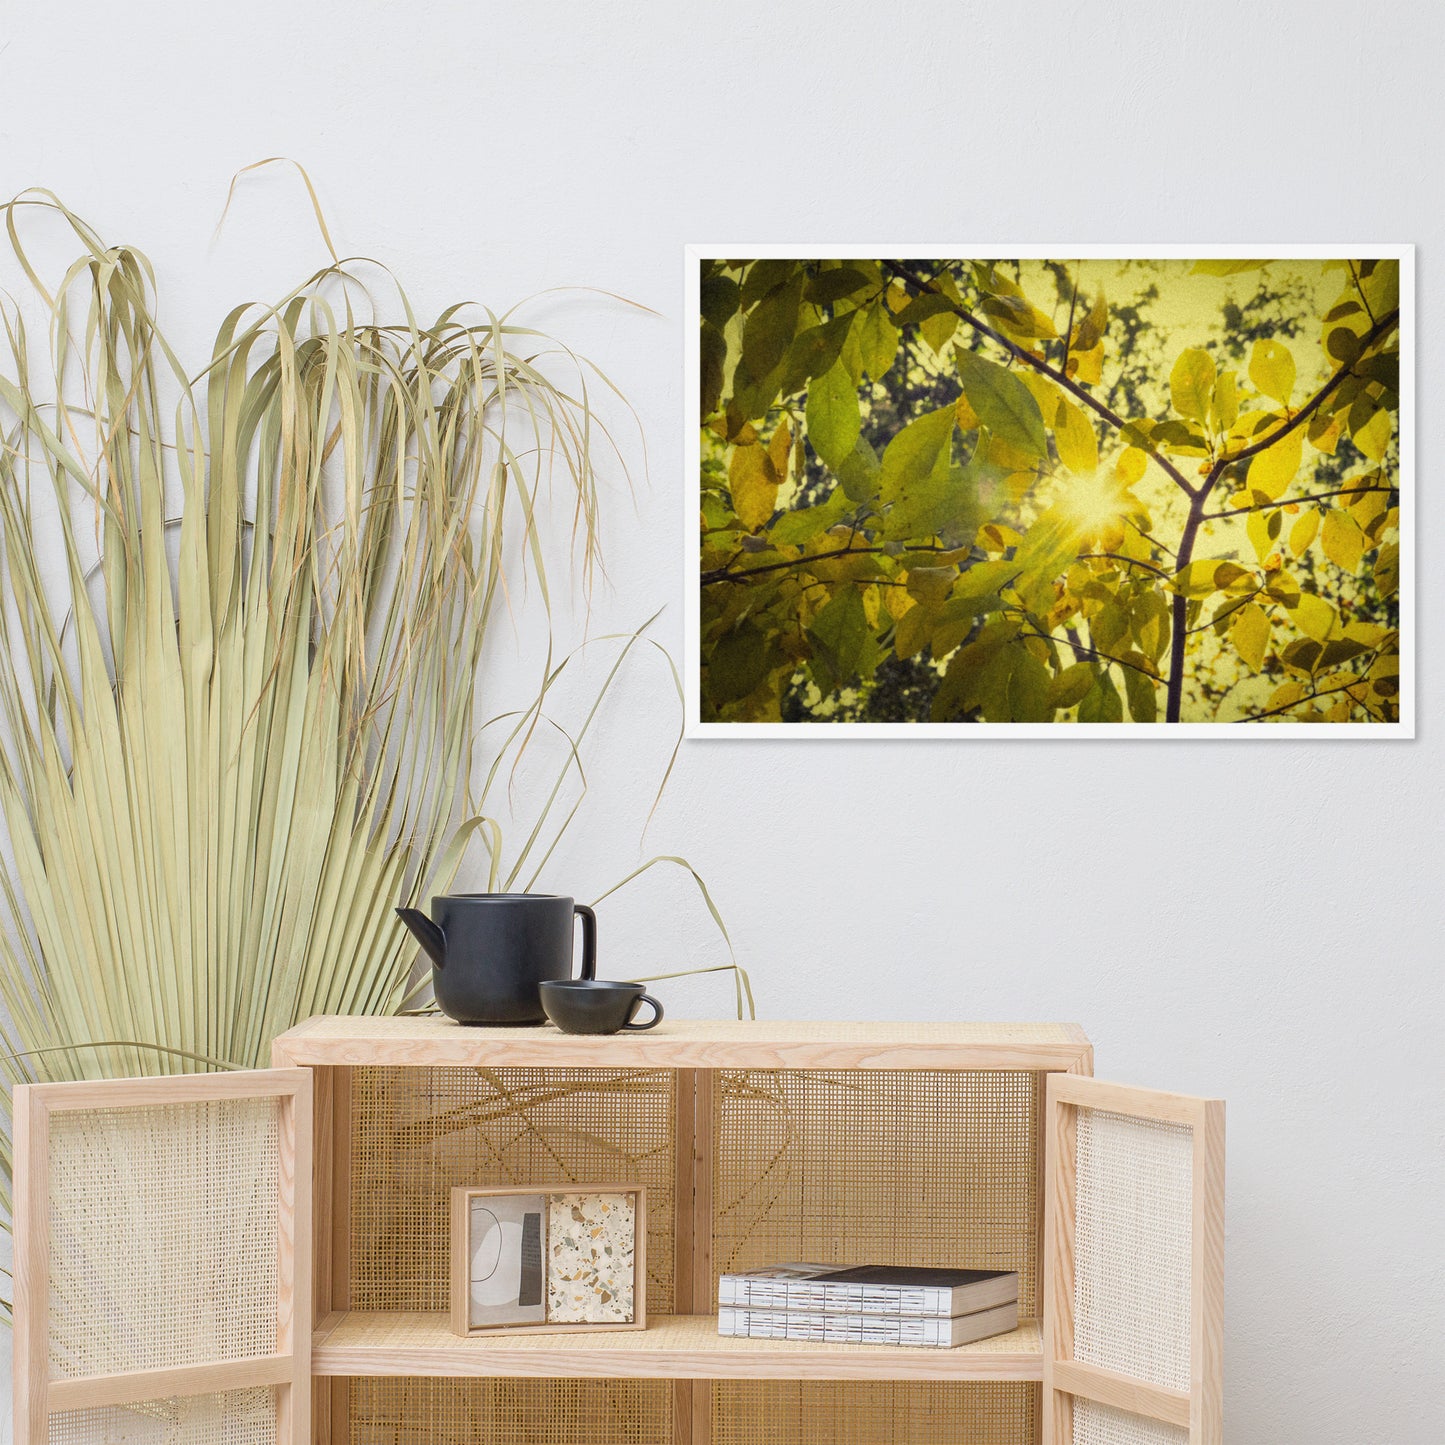 Wall Art Ideas For Hallway: Aged Golden Leaves Abstract / Country Farmhouse Style / Botanical / Nature Photo Framed Wall Art Print - Artwork - Home Decor